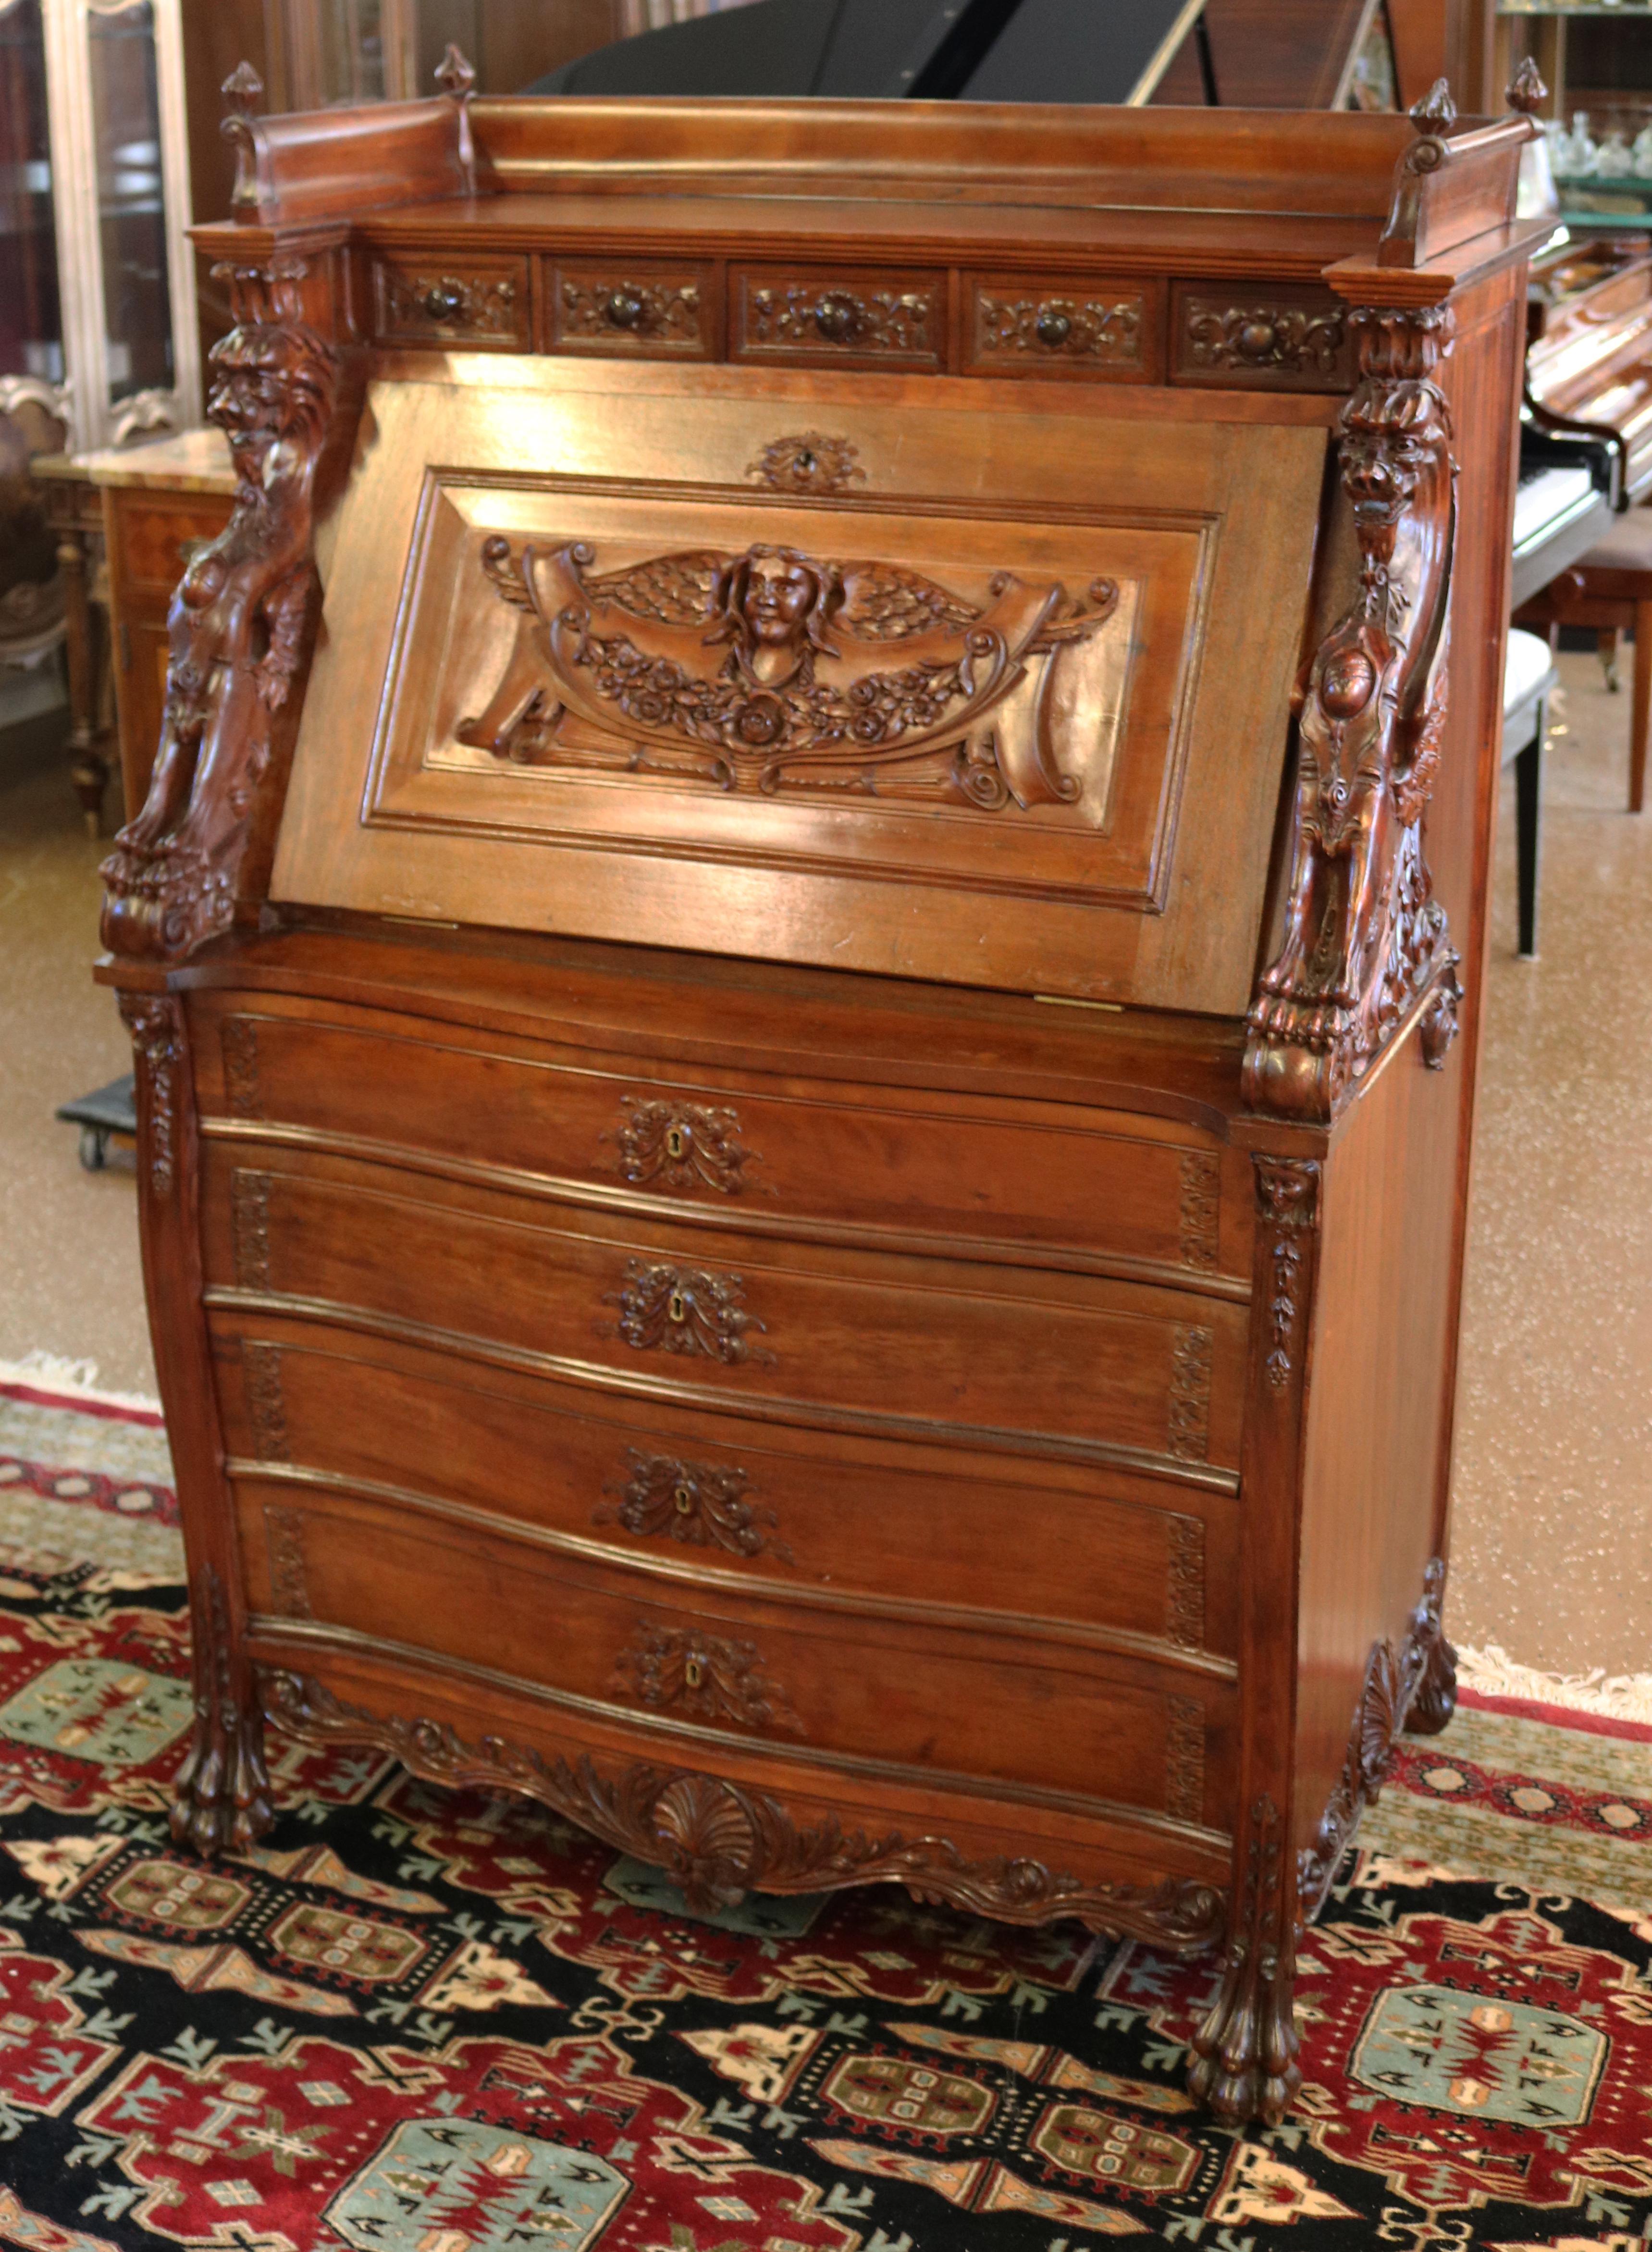 This late 19th century slant front desk was made in the USA most likely by R.J Horner of NYC. The desk is made of a fine mahogany and has two griffins flanking each side of the drop front desk. This piece is stunningly carved and lots of storage and